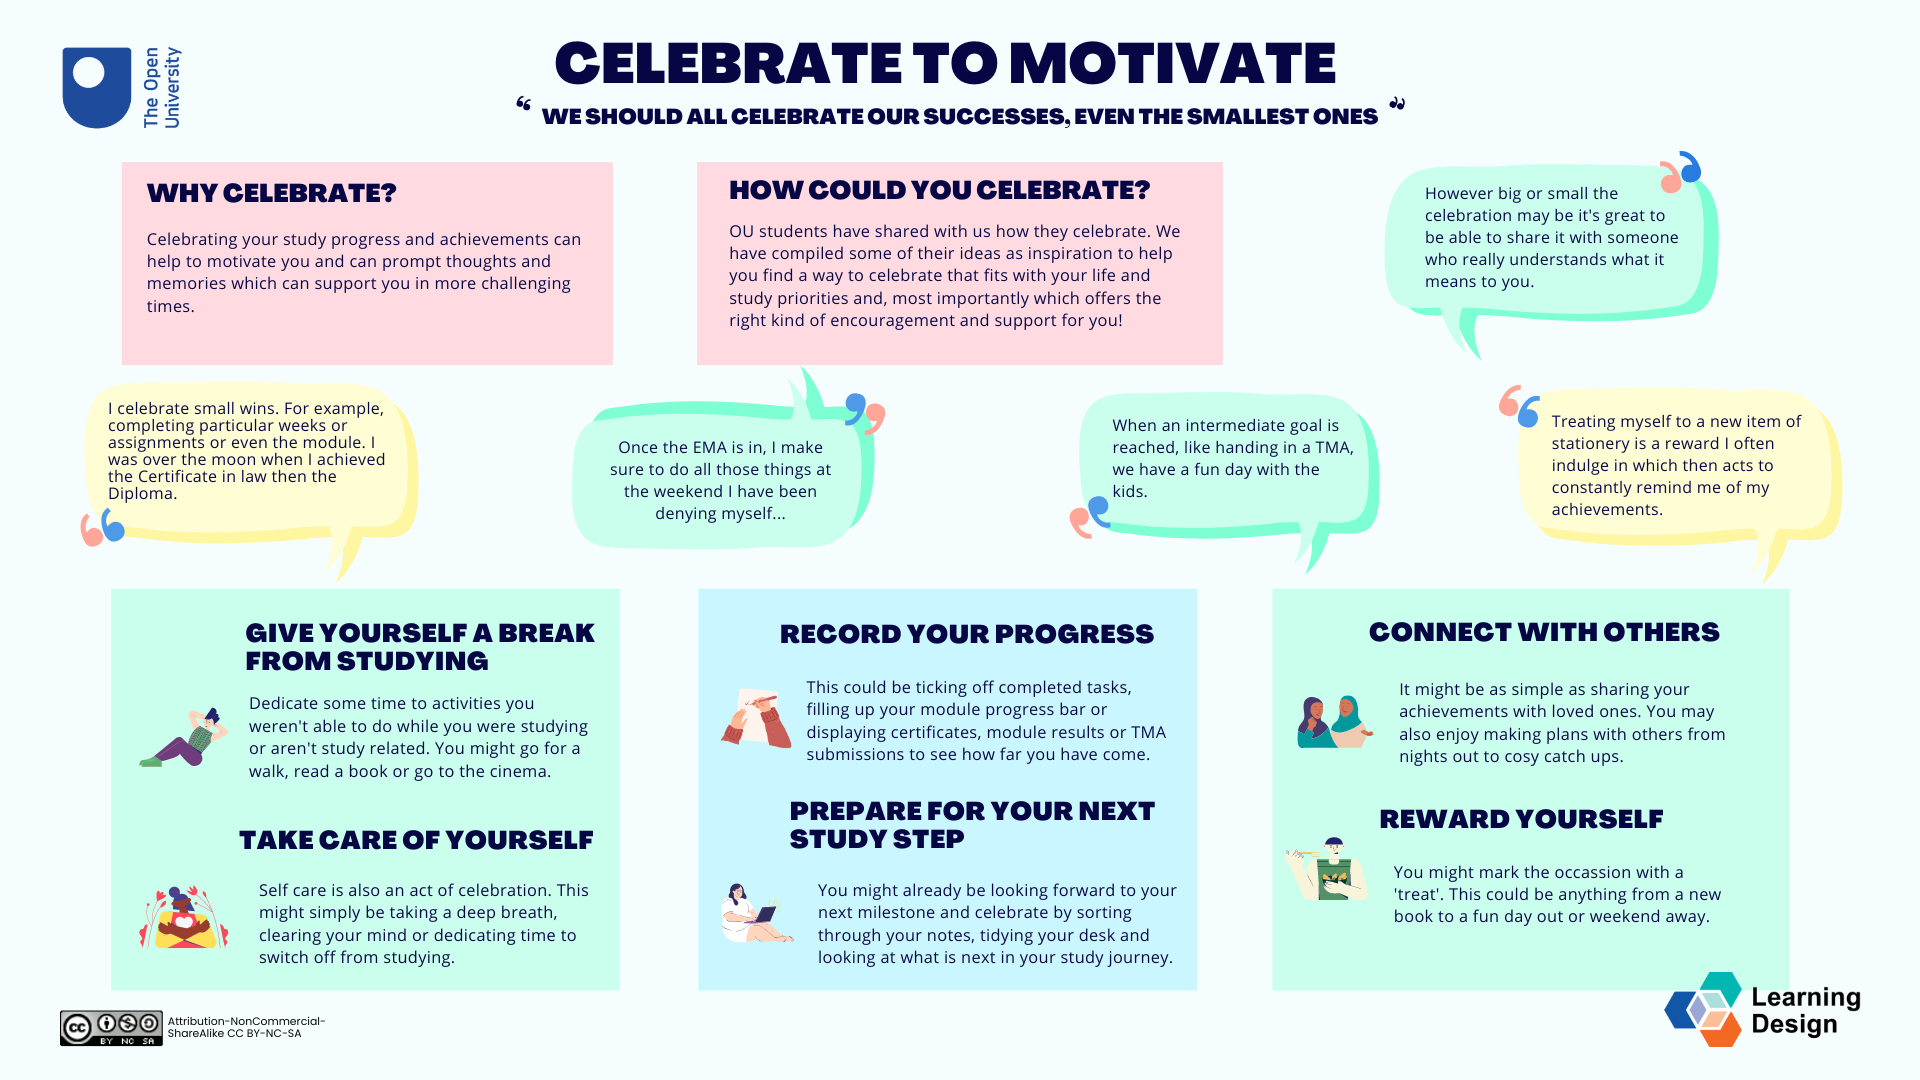 Poster with details of the power of celebration in motivation and wellbeing. Details suggetions on ways to celebrate. Includes quotes from students on how they have celebrated their successes.